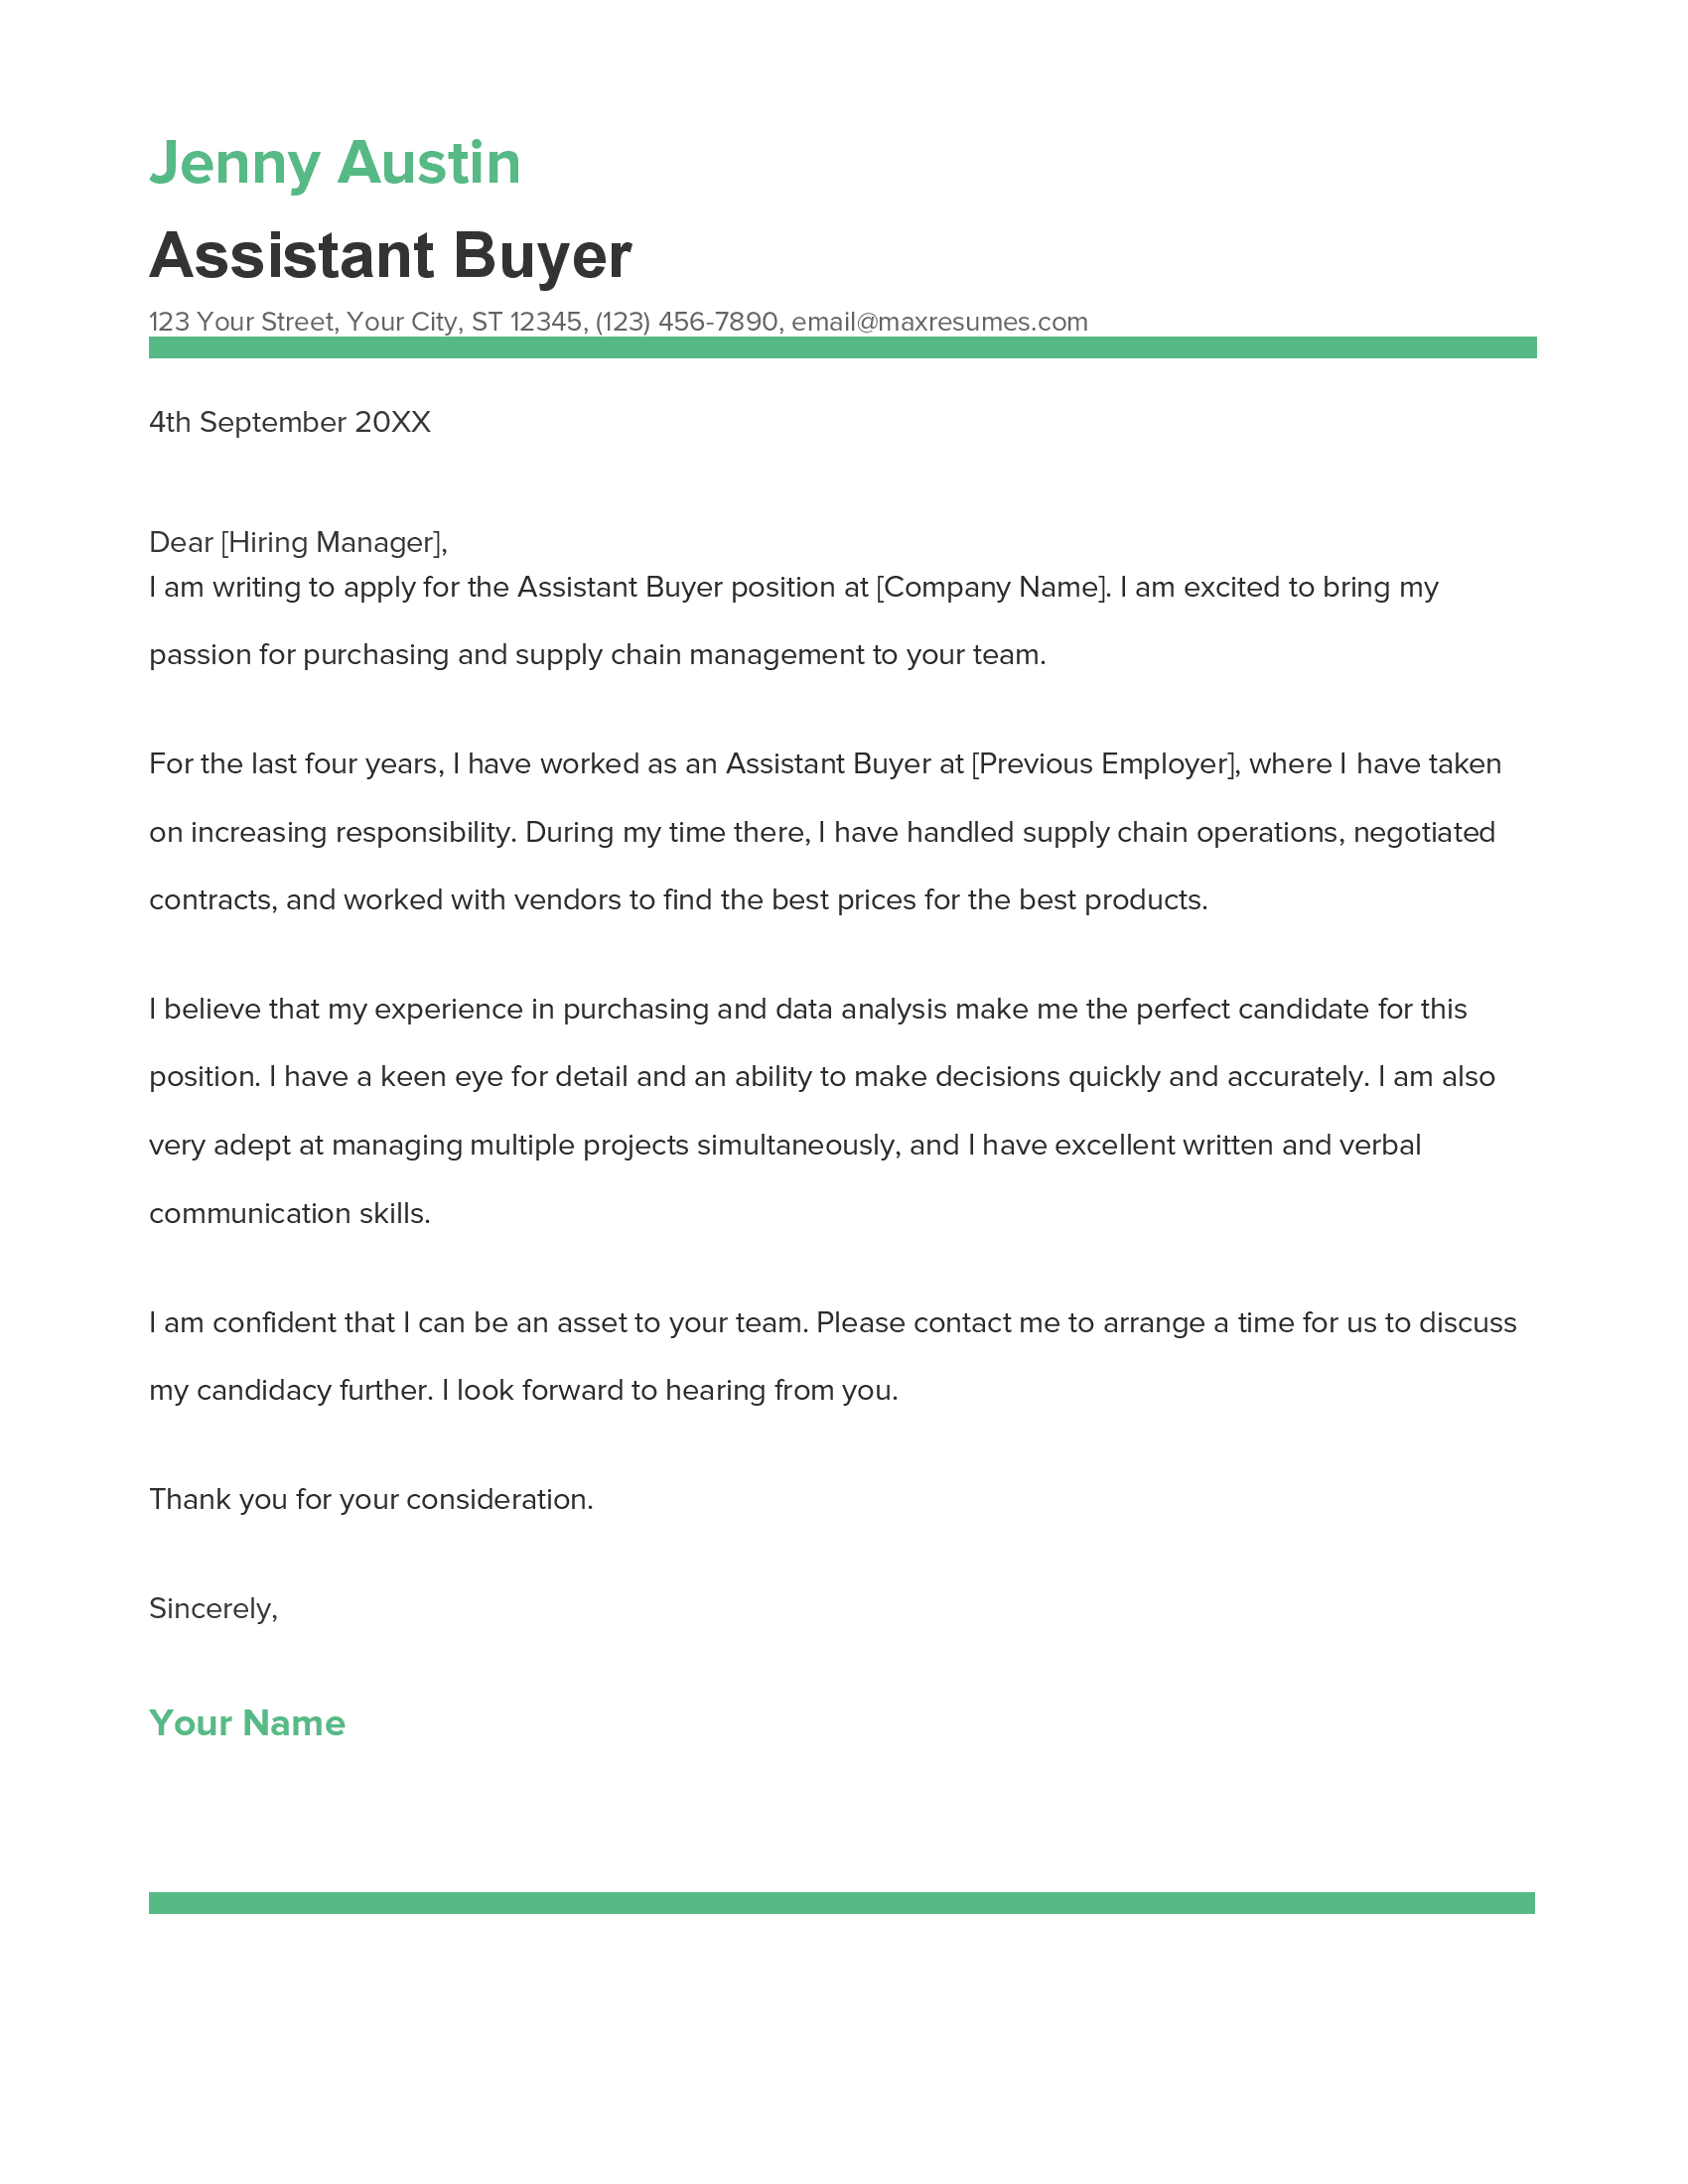 Assistant Buyer Cover Letter Example